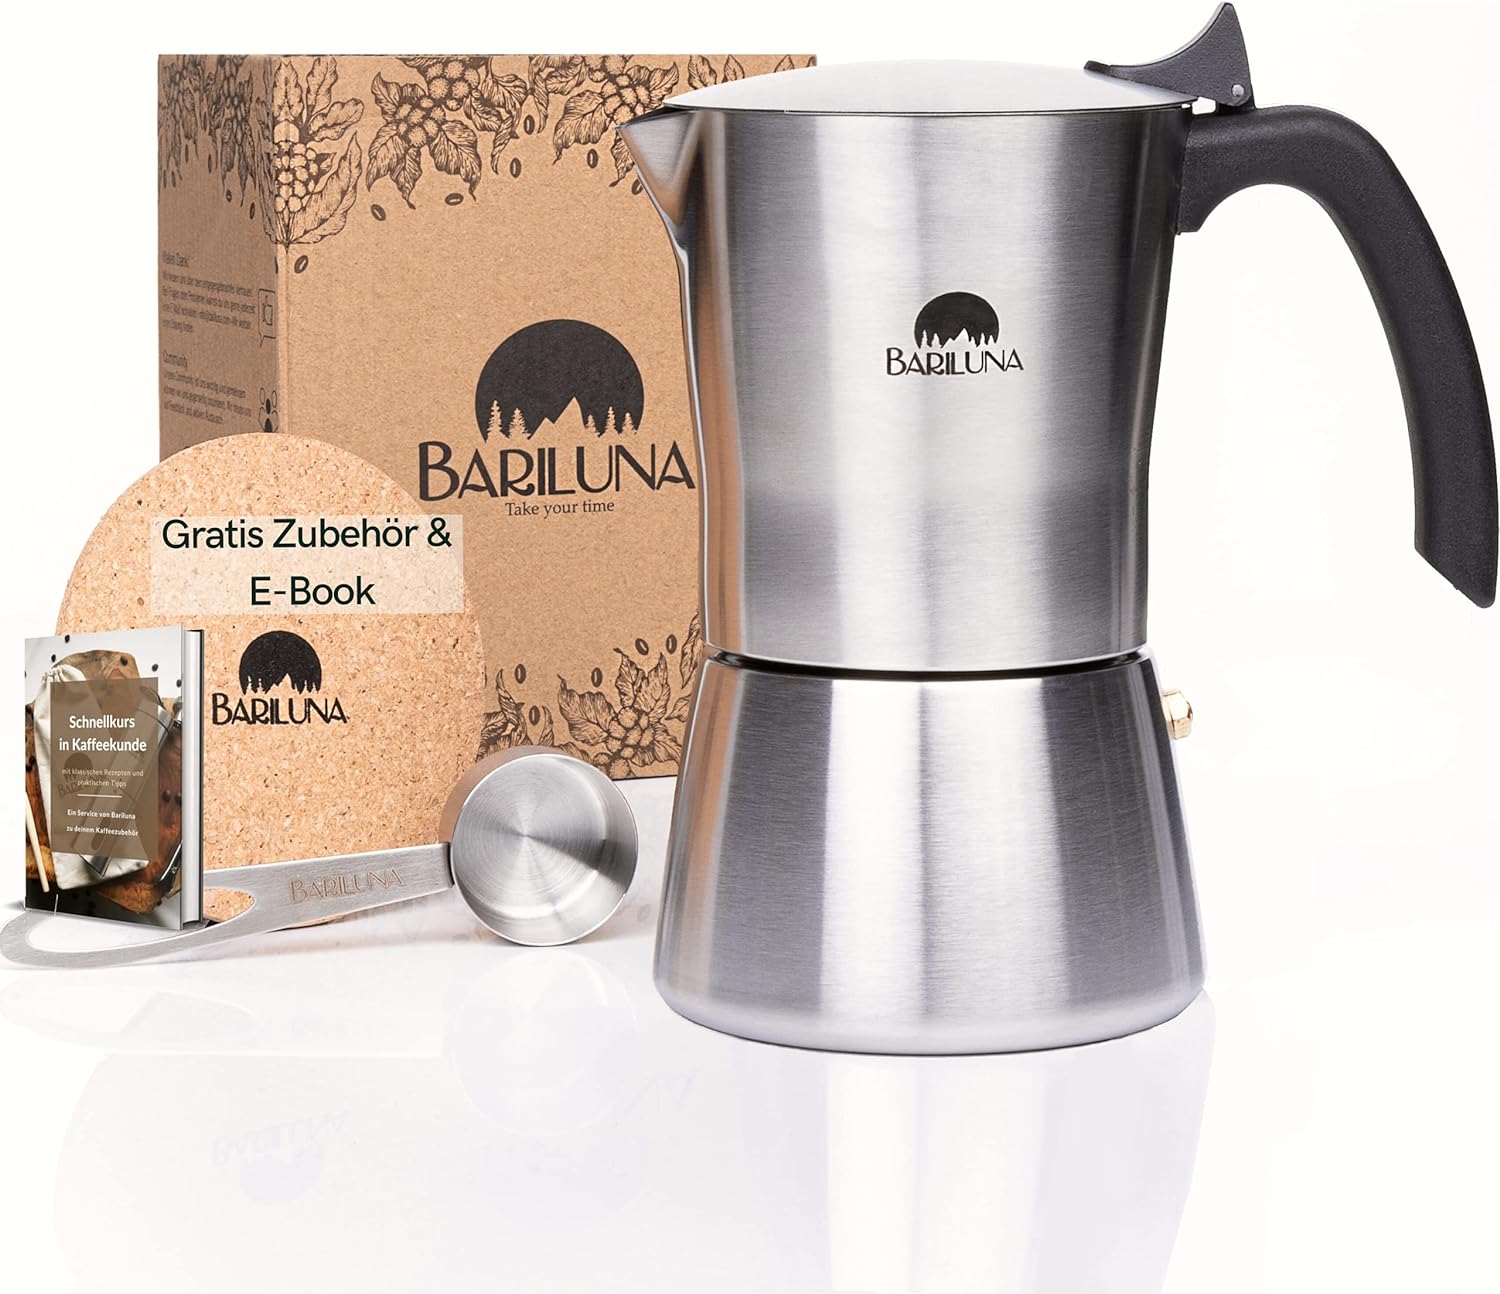 Bariluna® Premium Stainless Steel Espresso Maker, Suitable for Induction Cookers, 4-6 Cups Espresso, 150-300 ml Mocha Cooker, Camping Stove, Coffee Maker with Accessories, Aluminum Free for Coffee (4